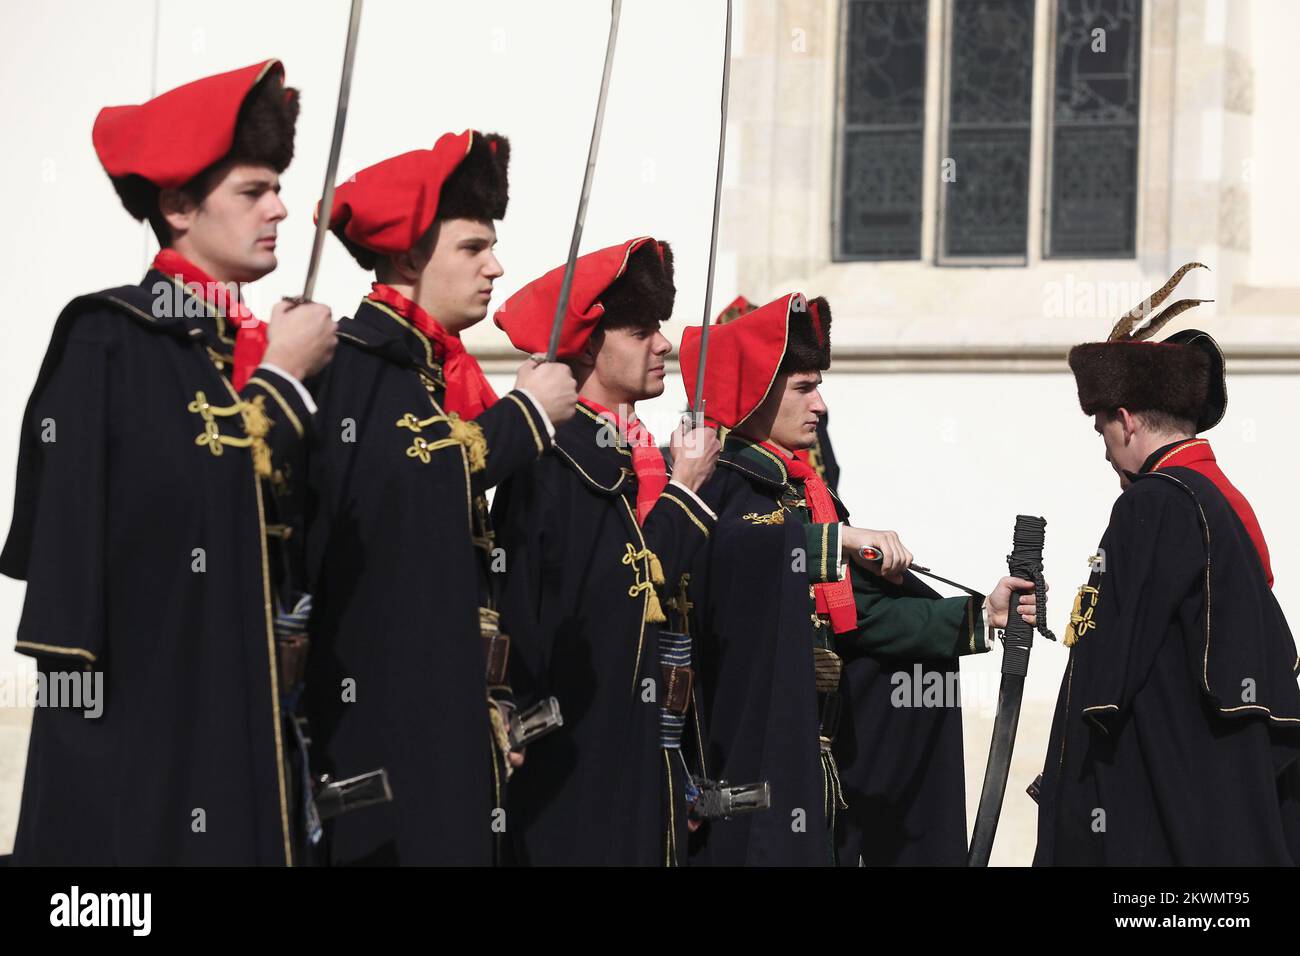 18.10.2012., Zagreb,Croatia - Croatia's International Day of the Cravat.Soldiers  in traditional uniforms participate in a changing of the guard ceremony in  St. Mark's Square in Zagreb . The traditional dress includes a